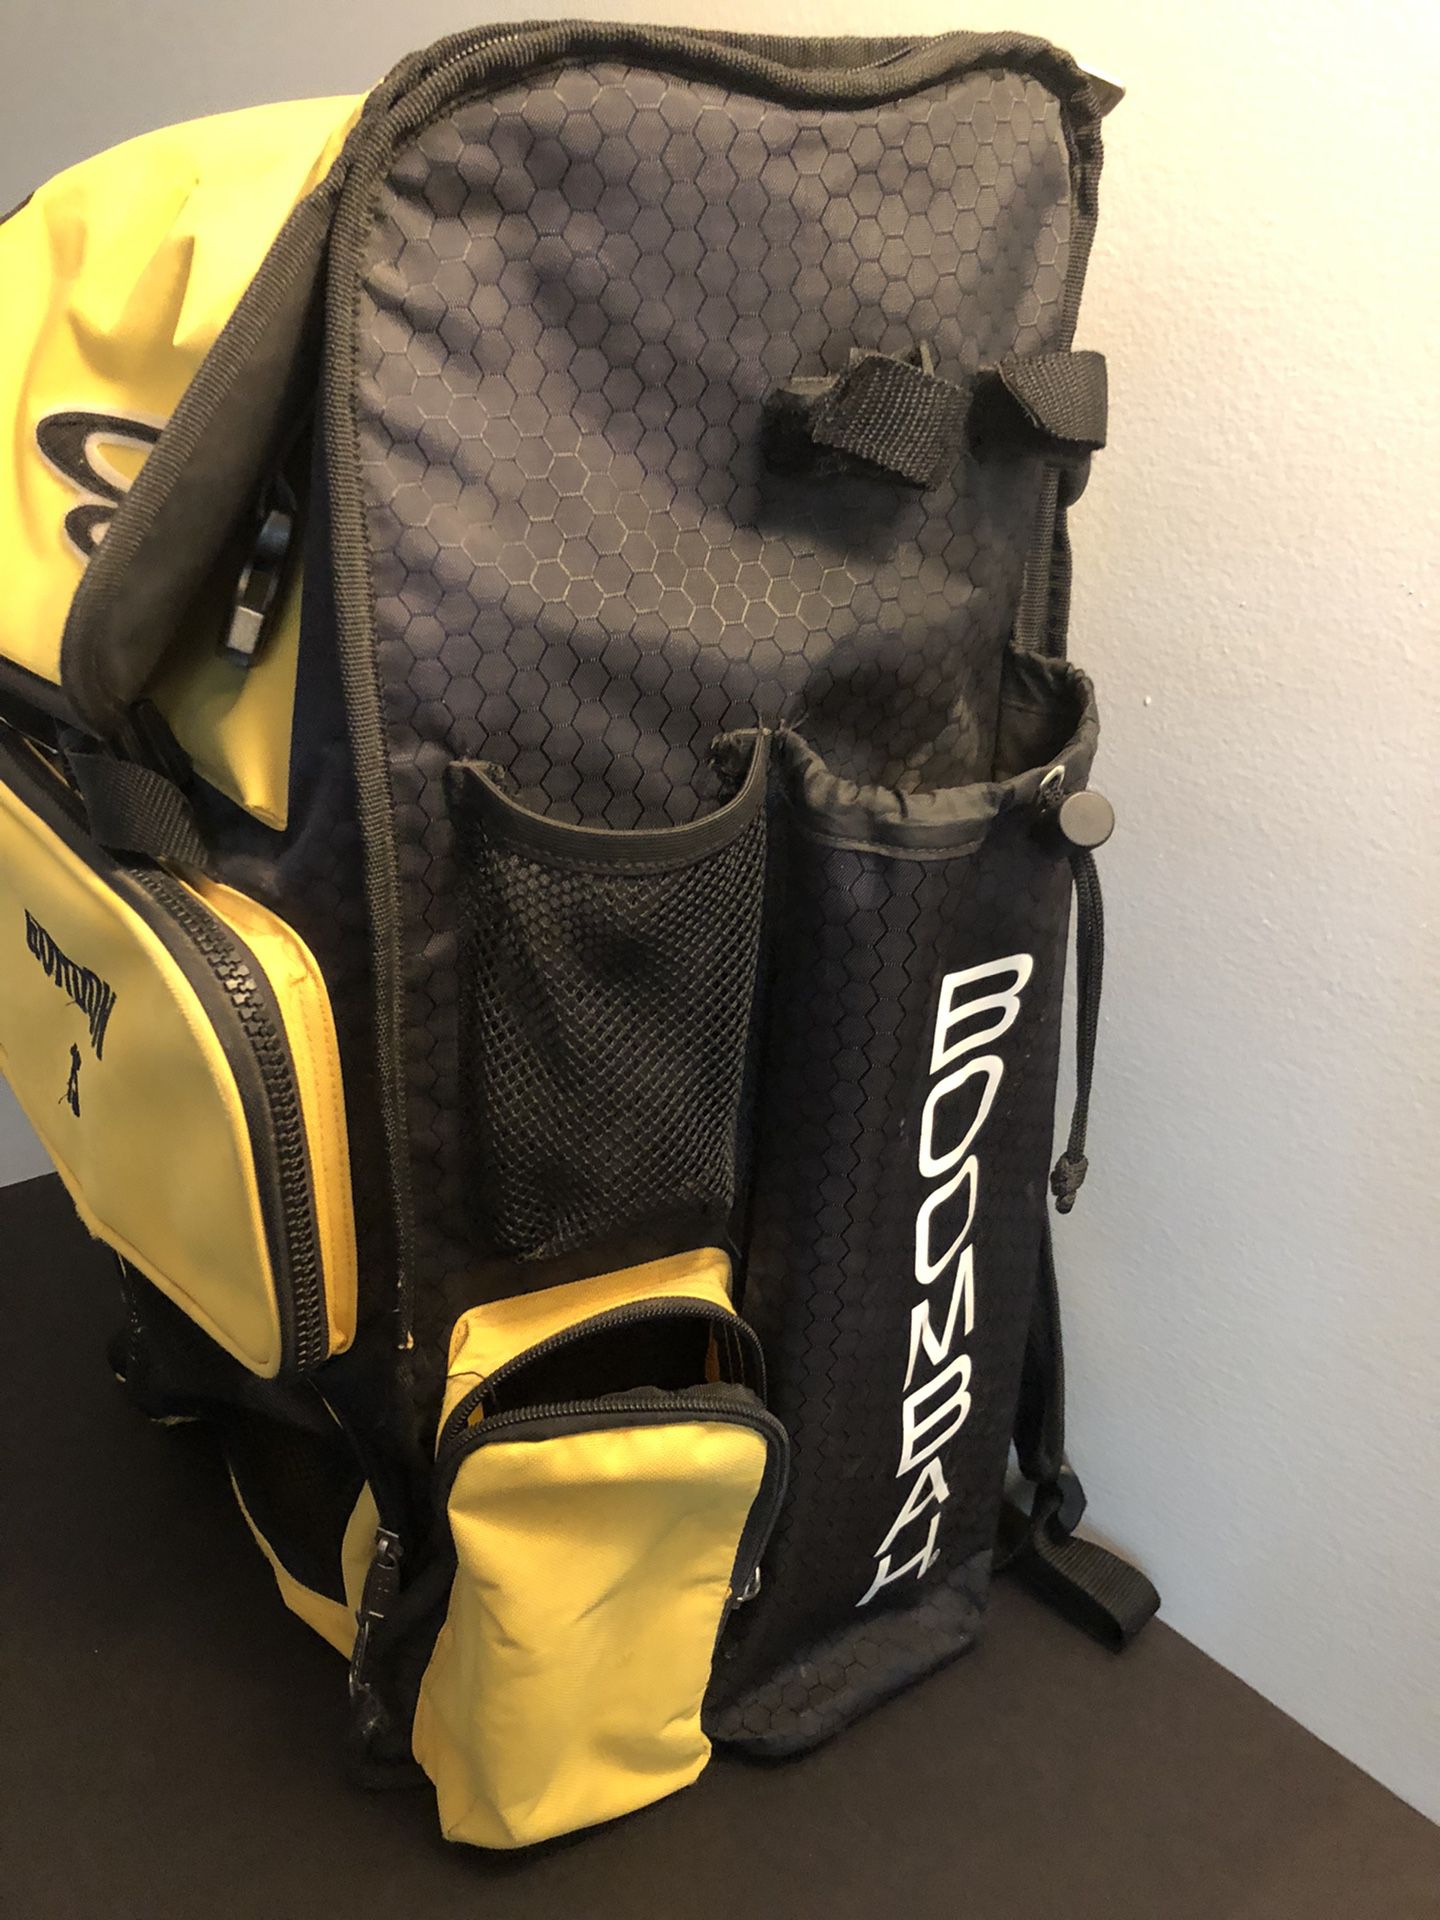 ⚾️Deluxe BoomBah Baseball Backpack With Gear!**🌟